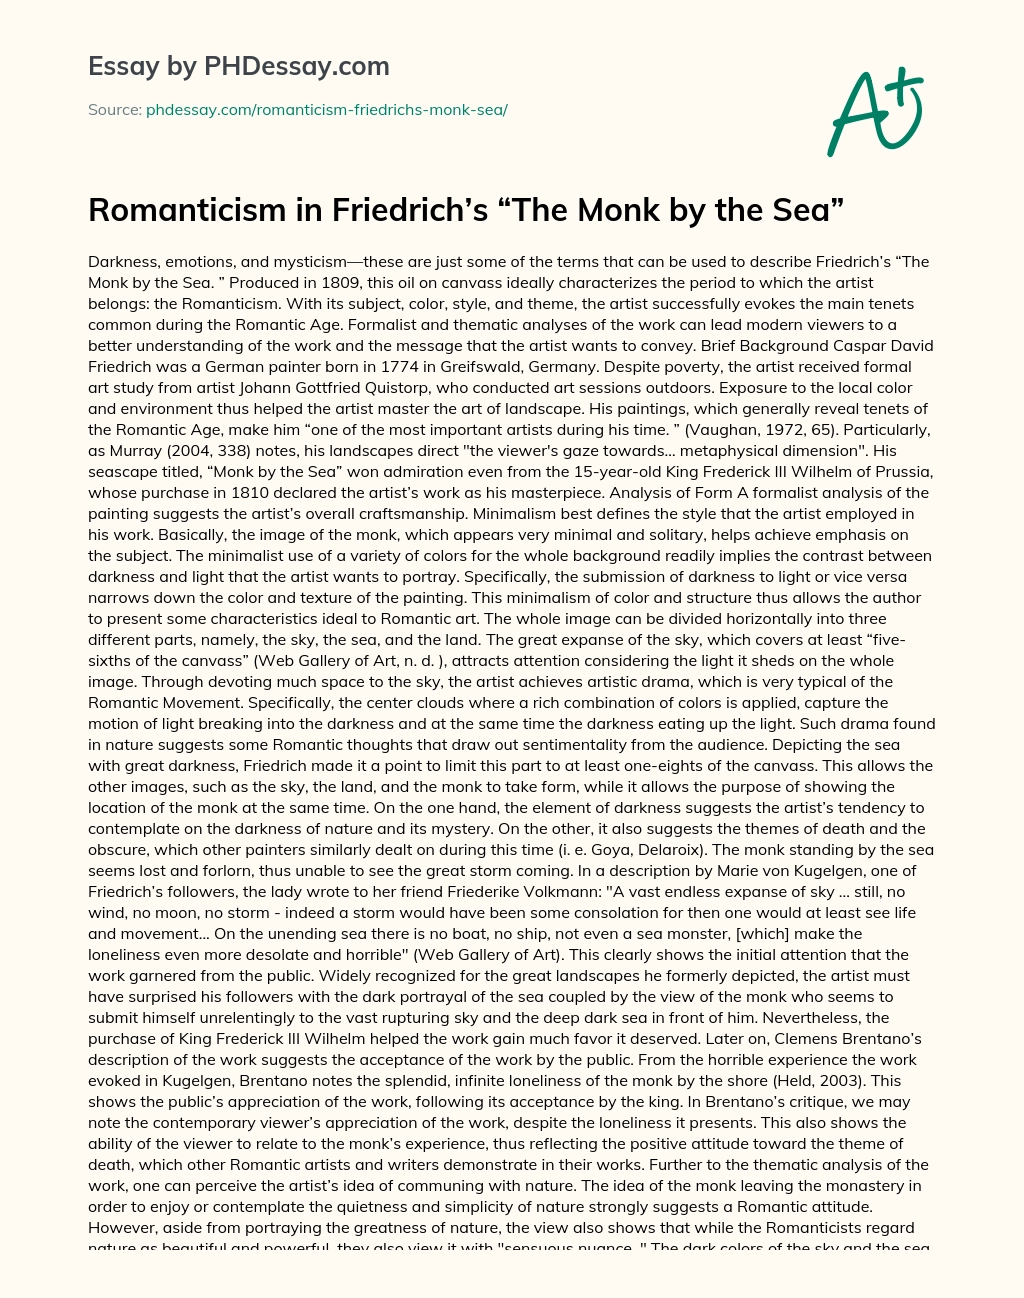 Romanticism in Friedrich’s “The Monk by the Sea” essay